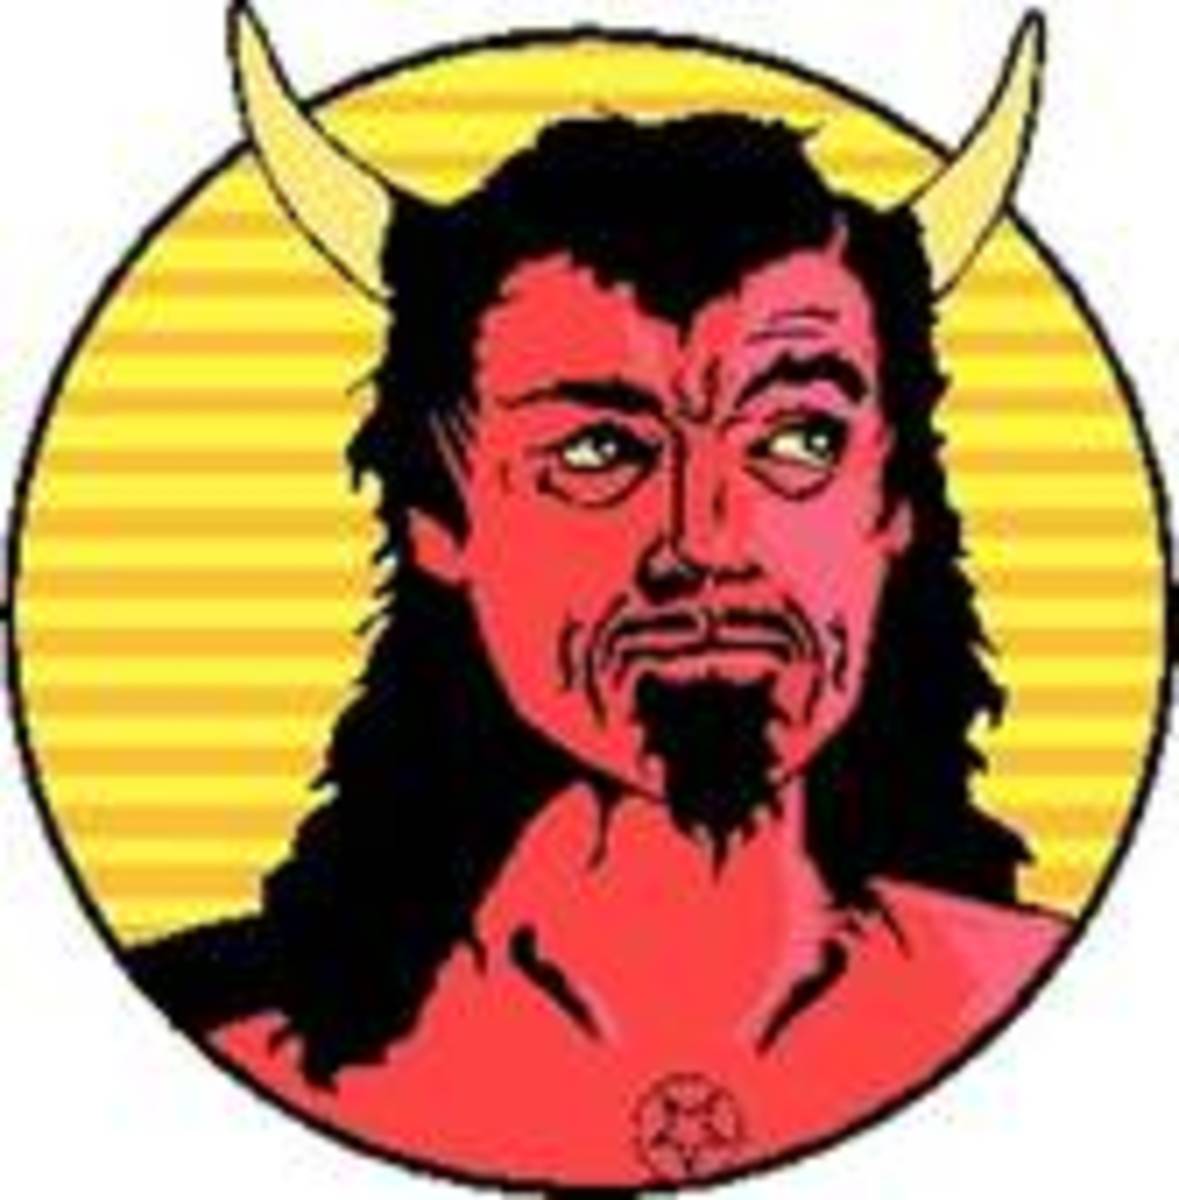 SATAN WOULD HAVE TO DO SOMETHING ABOUT THOSE HORRIBLE HORNS, BUT EQUAL OPPORTUNITY EMPLOYMENT RULES SAY THAT EMPLOYEES CAN WEAR TATS.